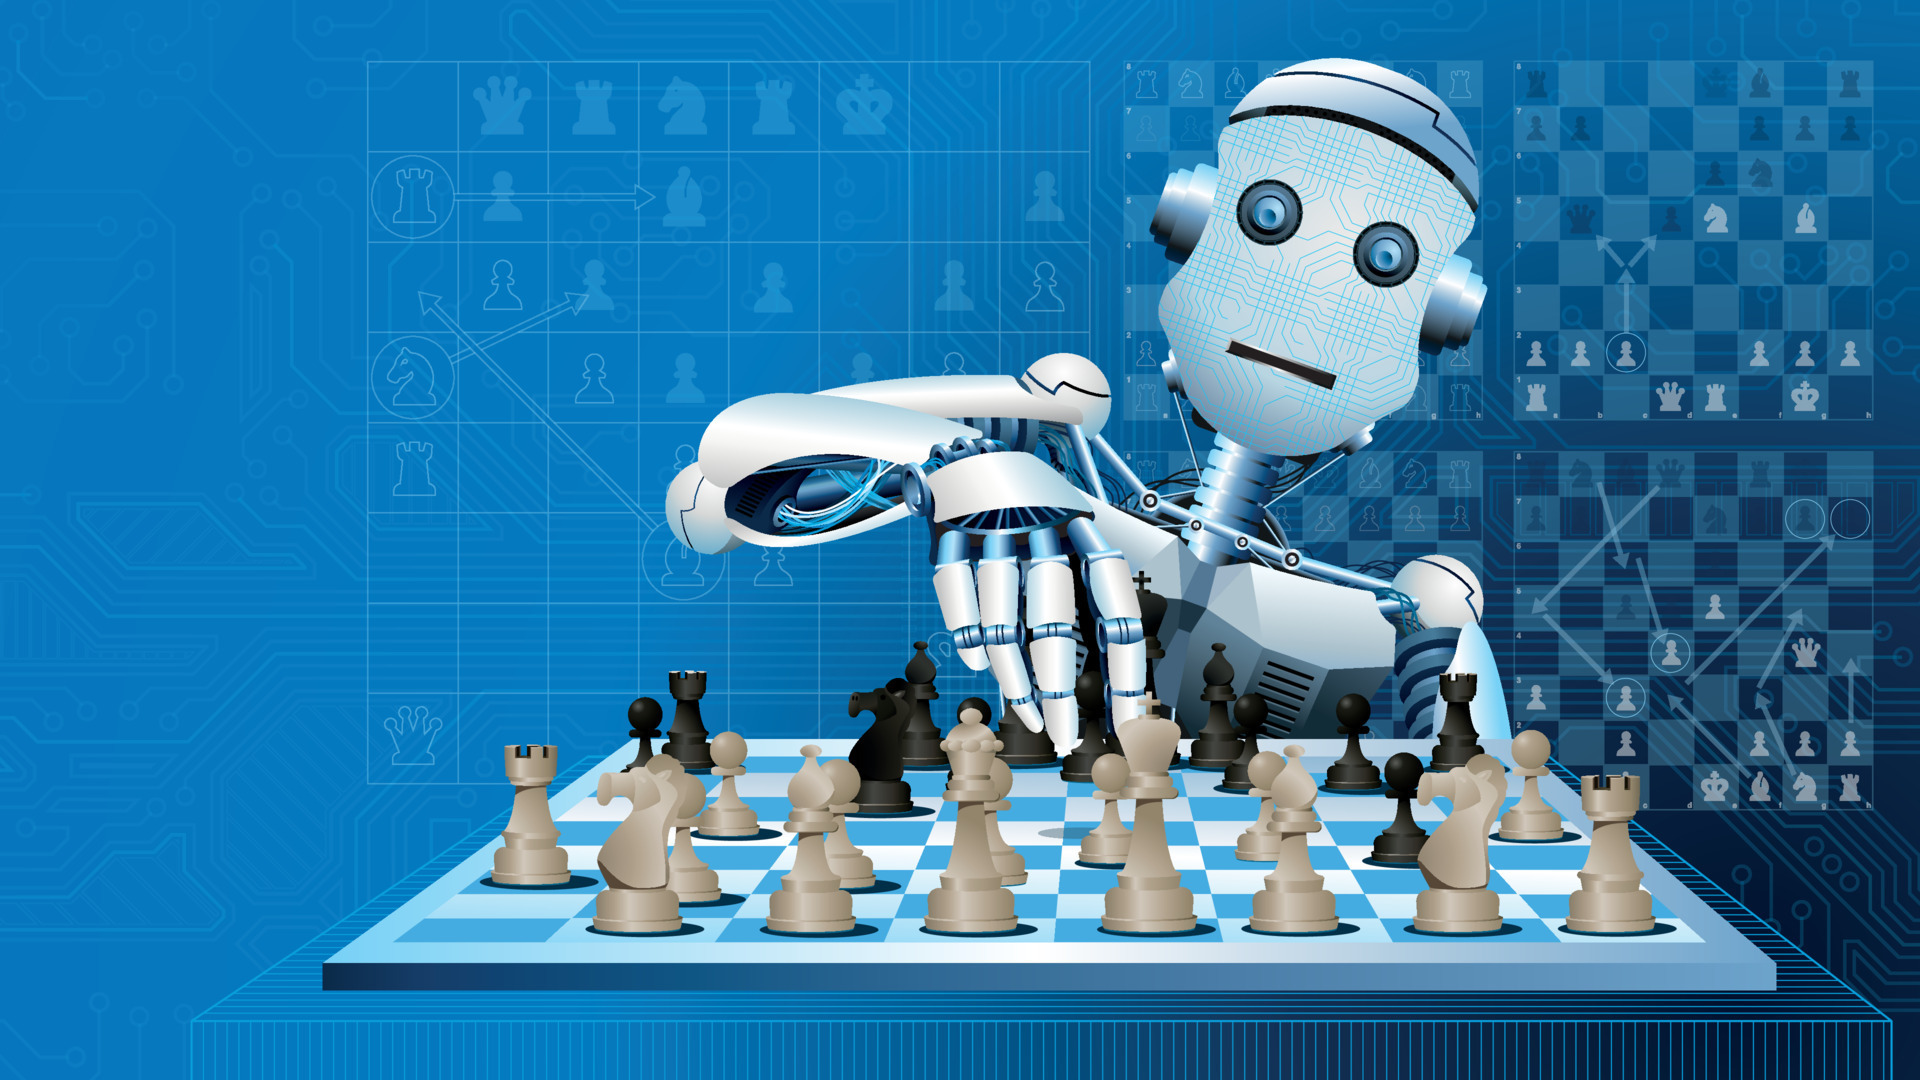 The race between humans and robots as teachers in chess (part 3: Flashcards)